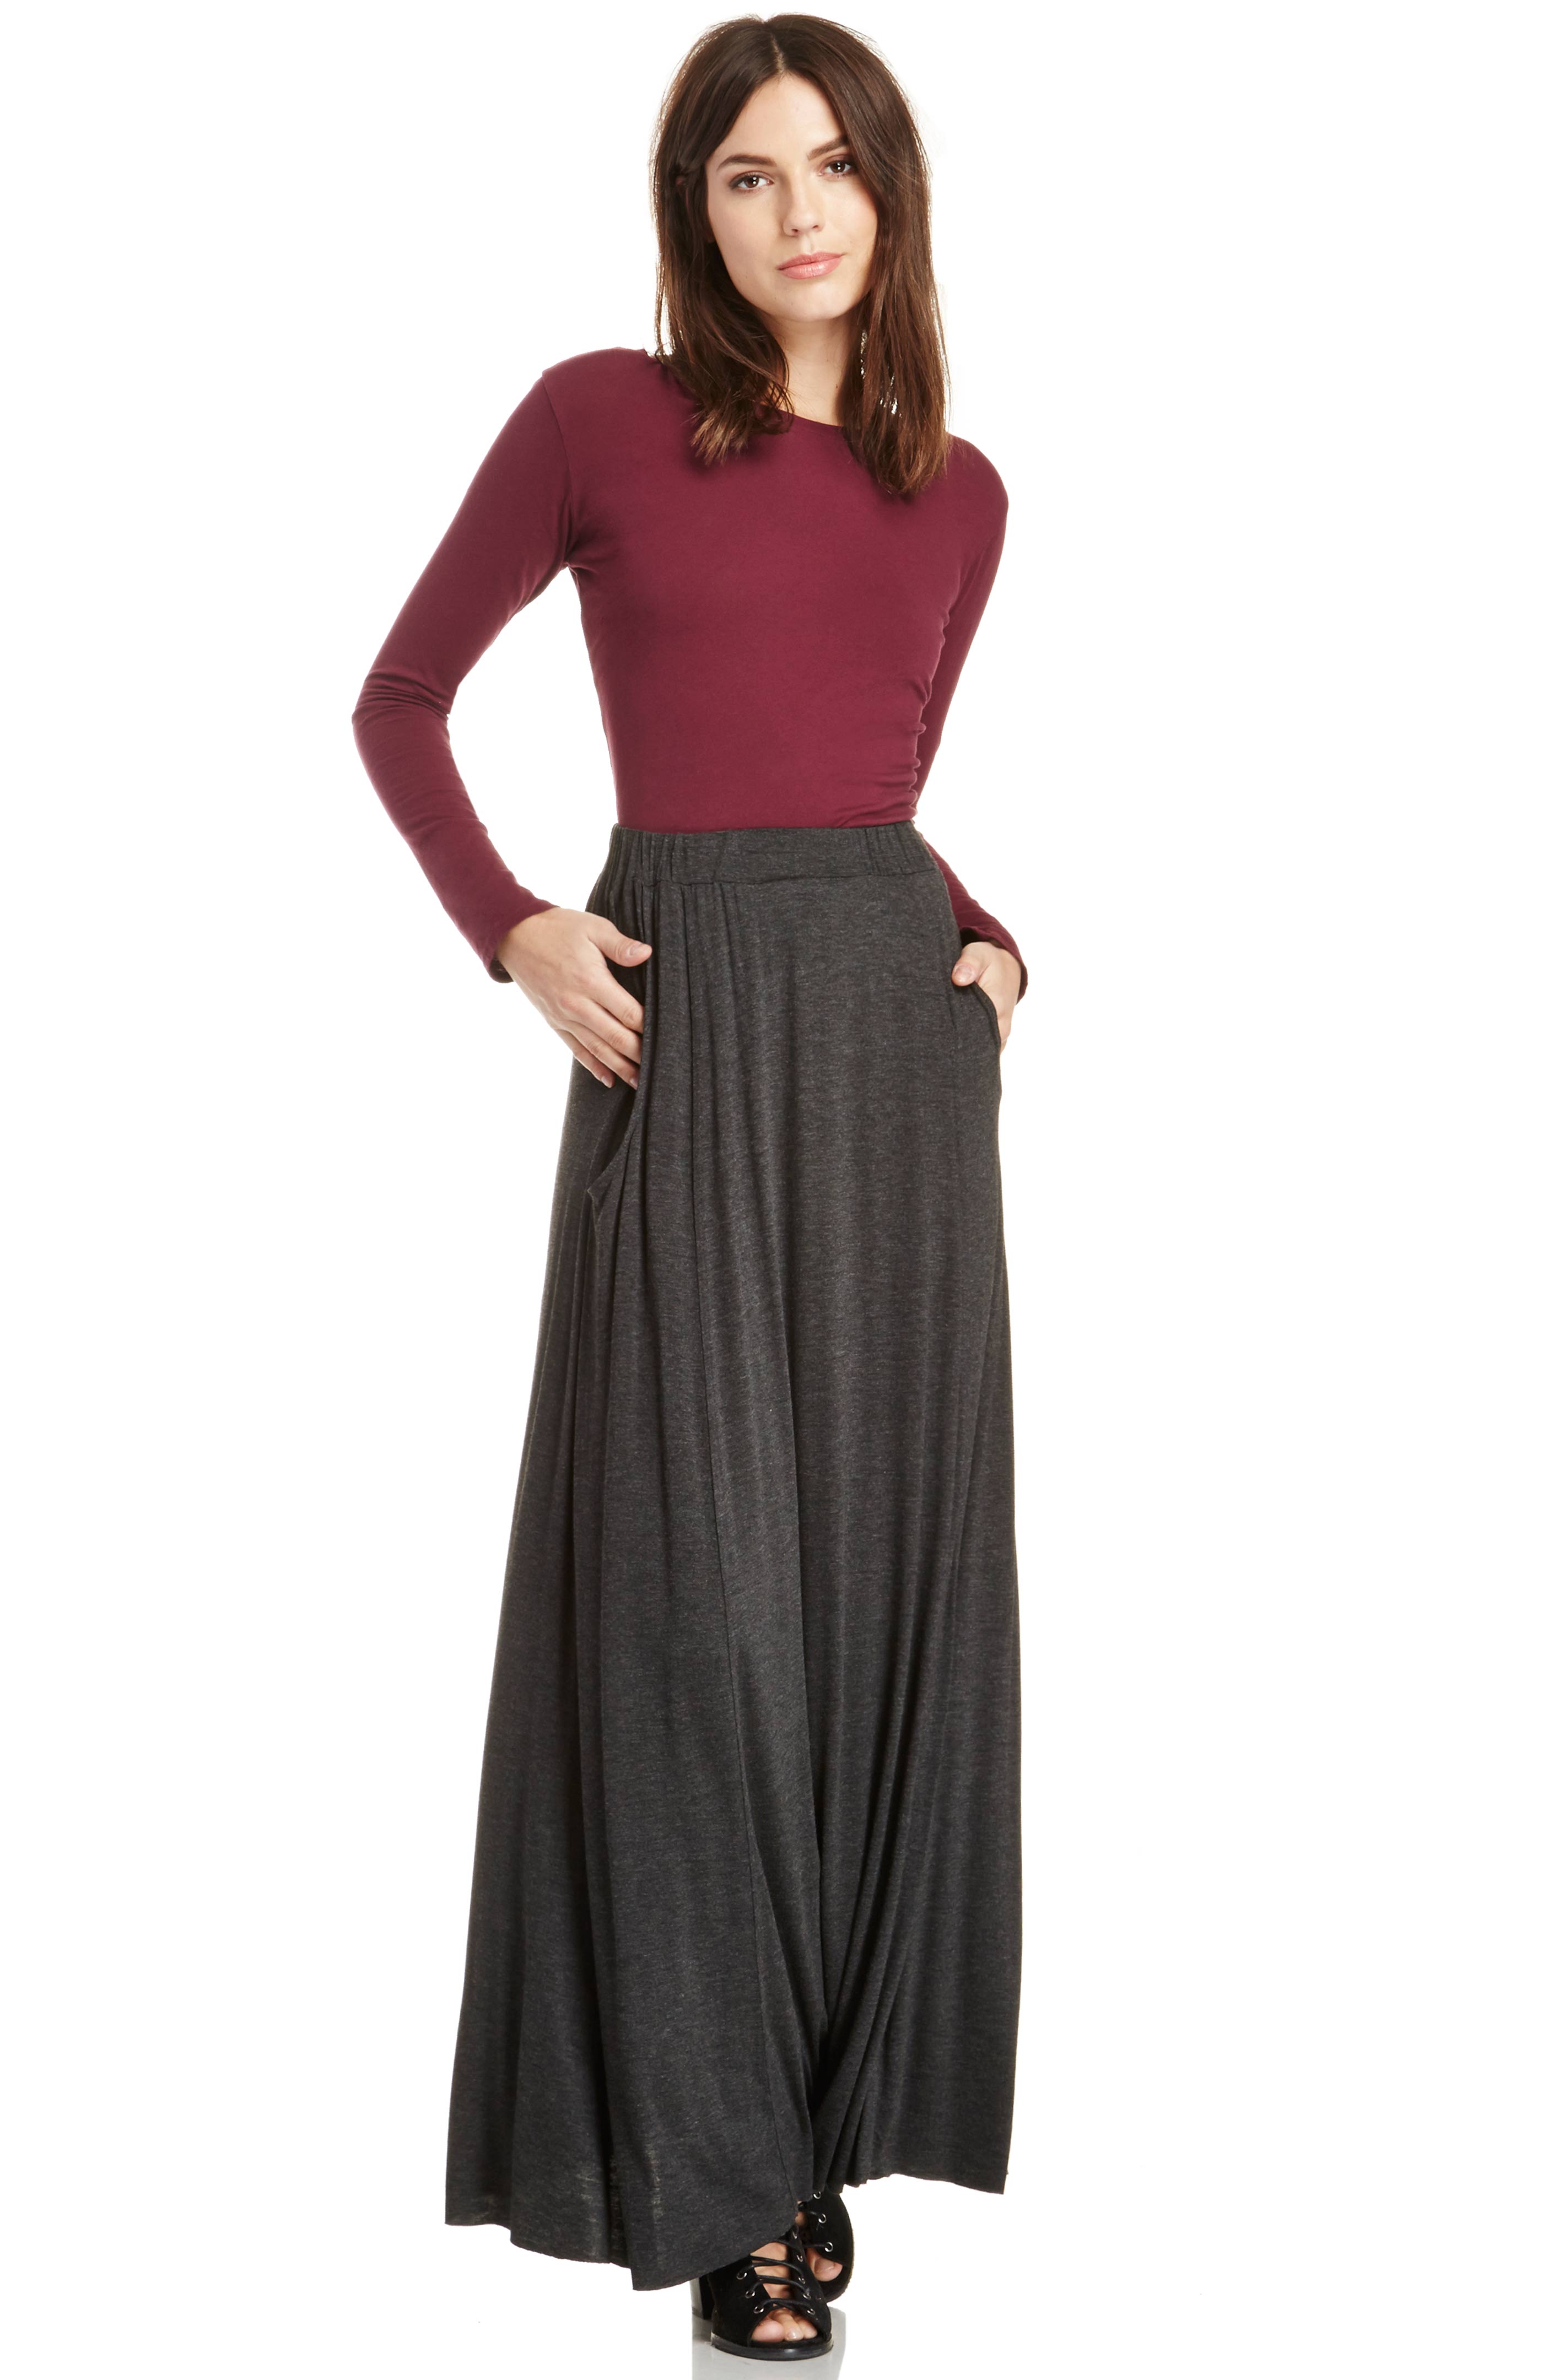 DAILYLOOK Pocketed Stretch Knit Maxi Skirt in Charcoal | DAILYLOOK